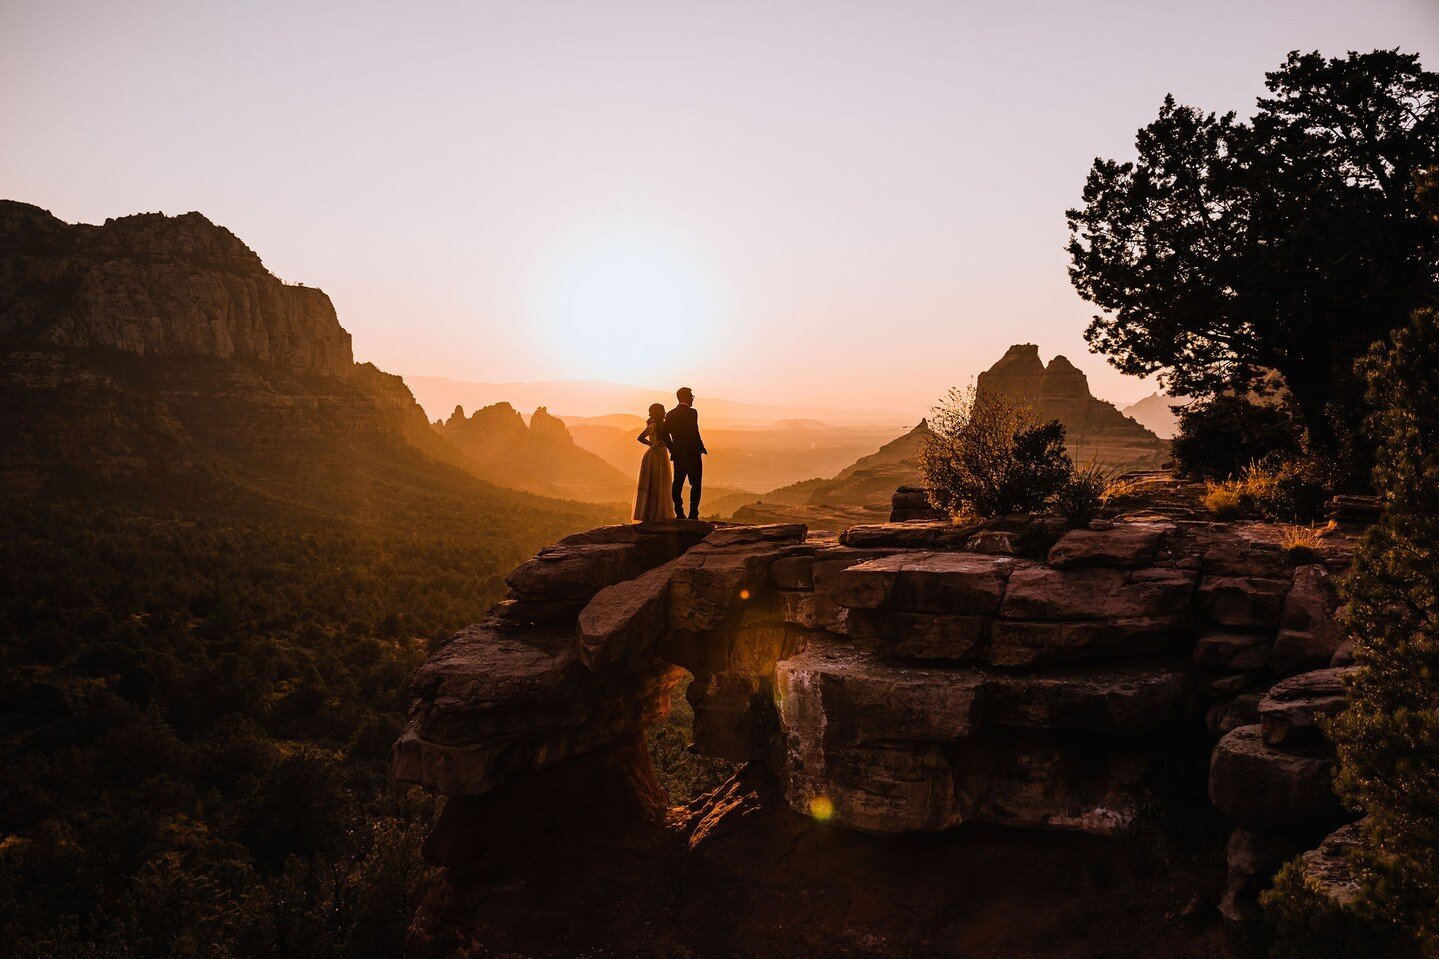 🏜️ From Sedona, to Moab, to Joshua Tree, desert sunsets never disappoint.

One sunset we will never forget was on S + Z's elopement day. We ended the evening on a rocky overlook at sunset. There was golden light, bright orange light, and then BAM! P